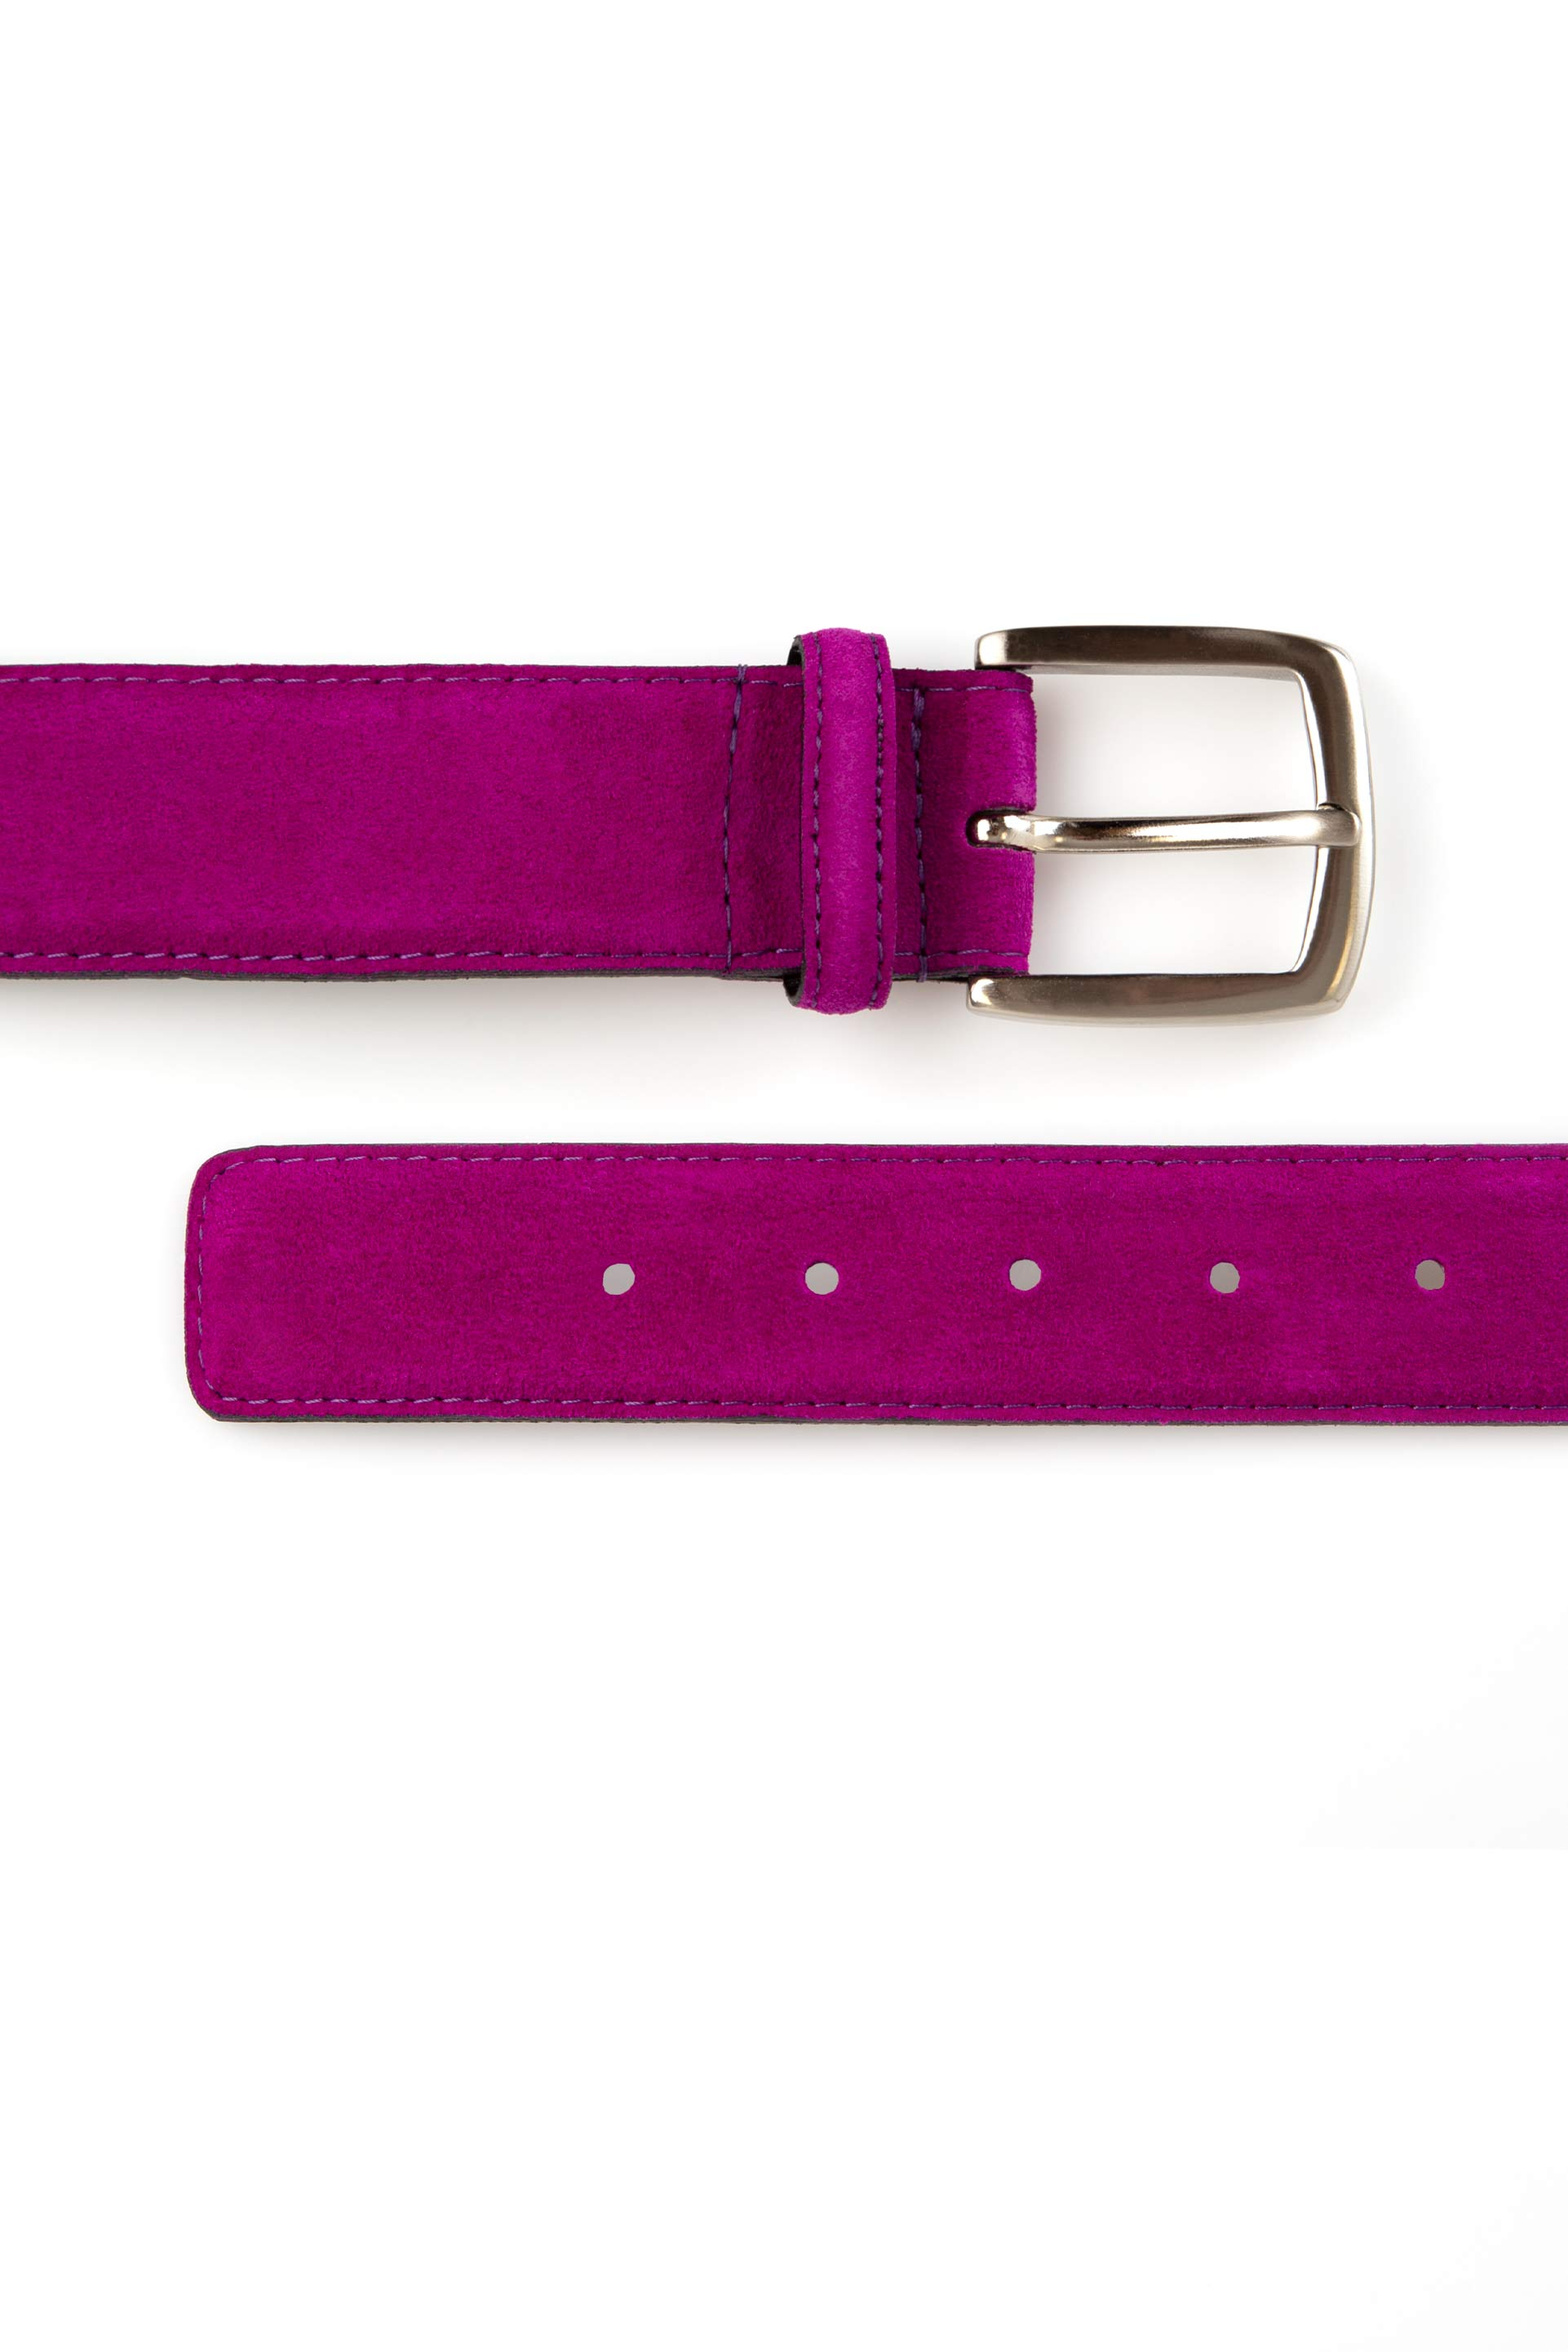 be500_classic_suede_belt_bright_amethyst_suede_white_background.jpg